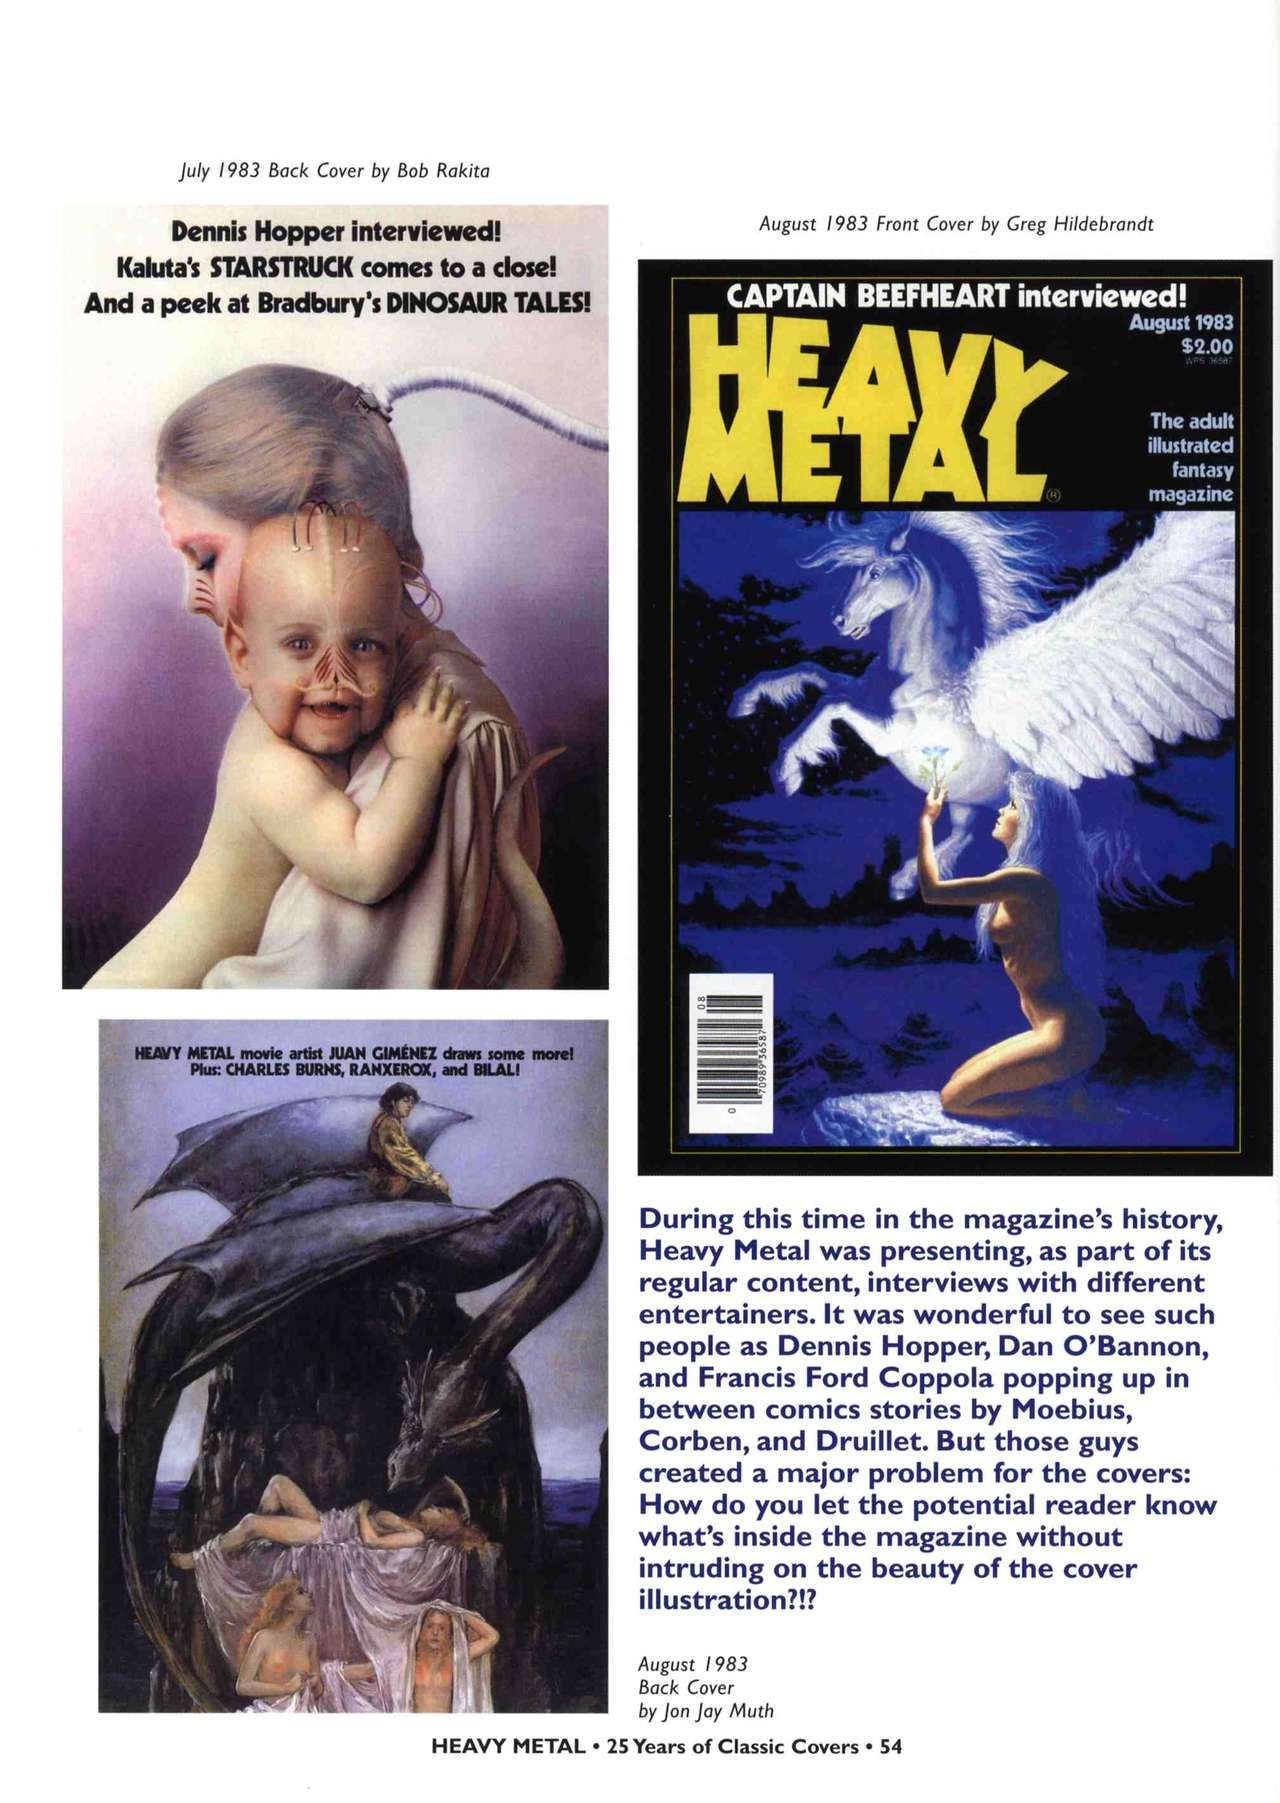 HEAVY METAL 25 Years of Classic Covers 59